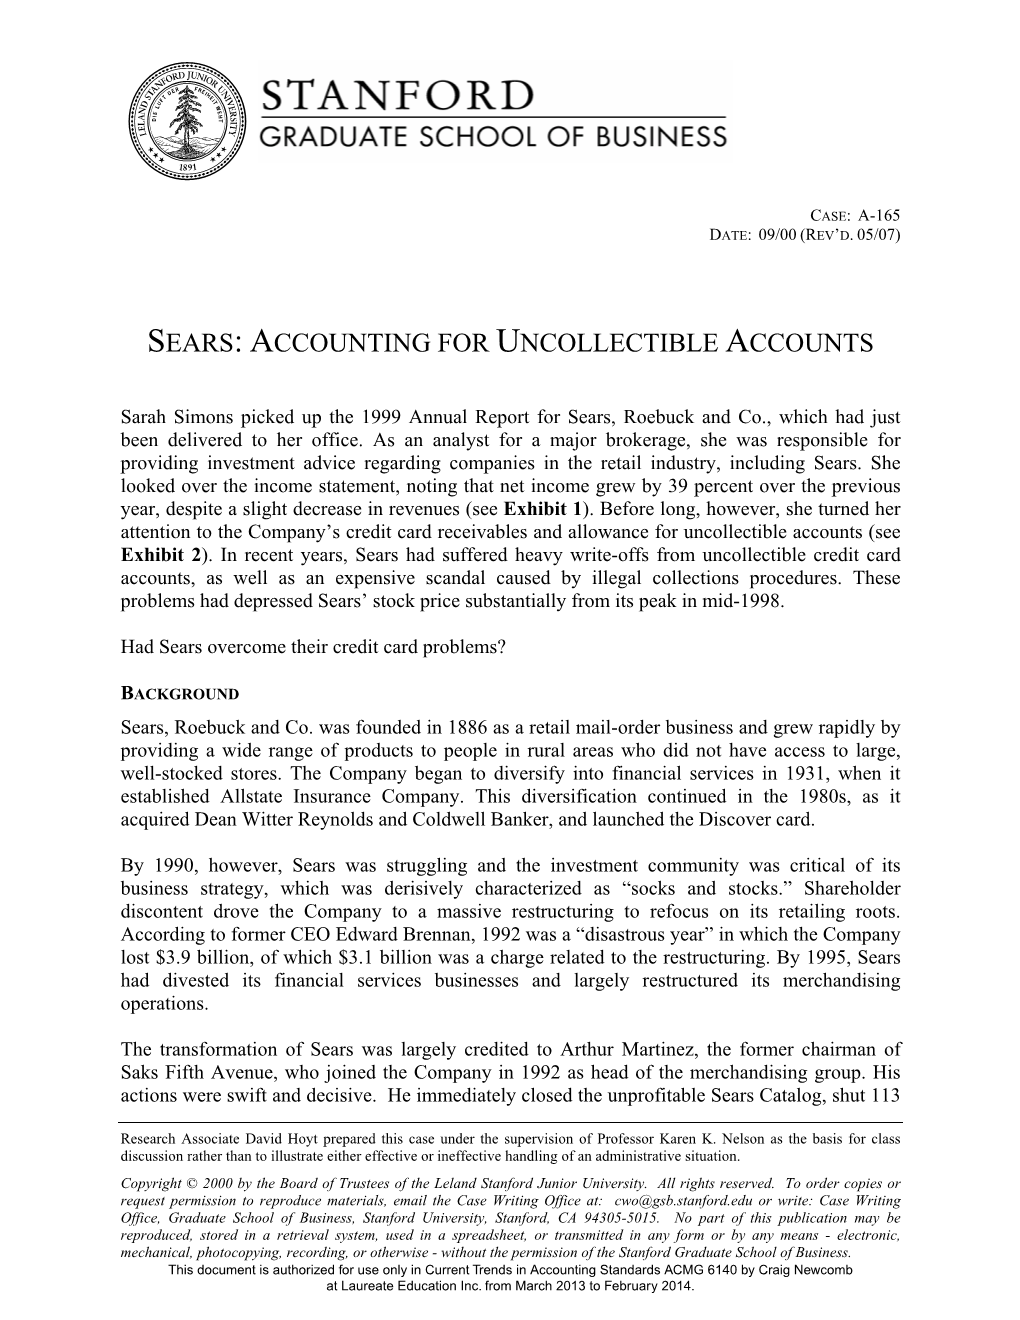 Sears: Accounting for Uncollectible Accounts